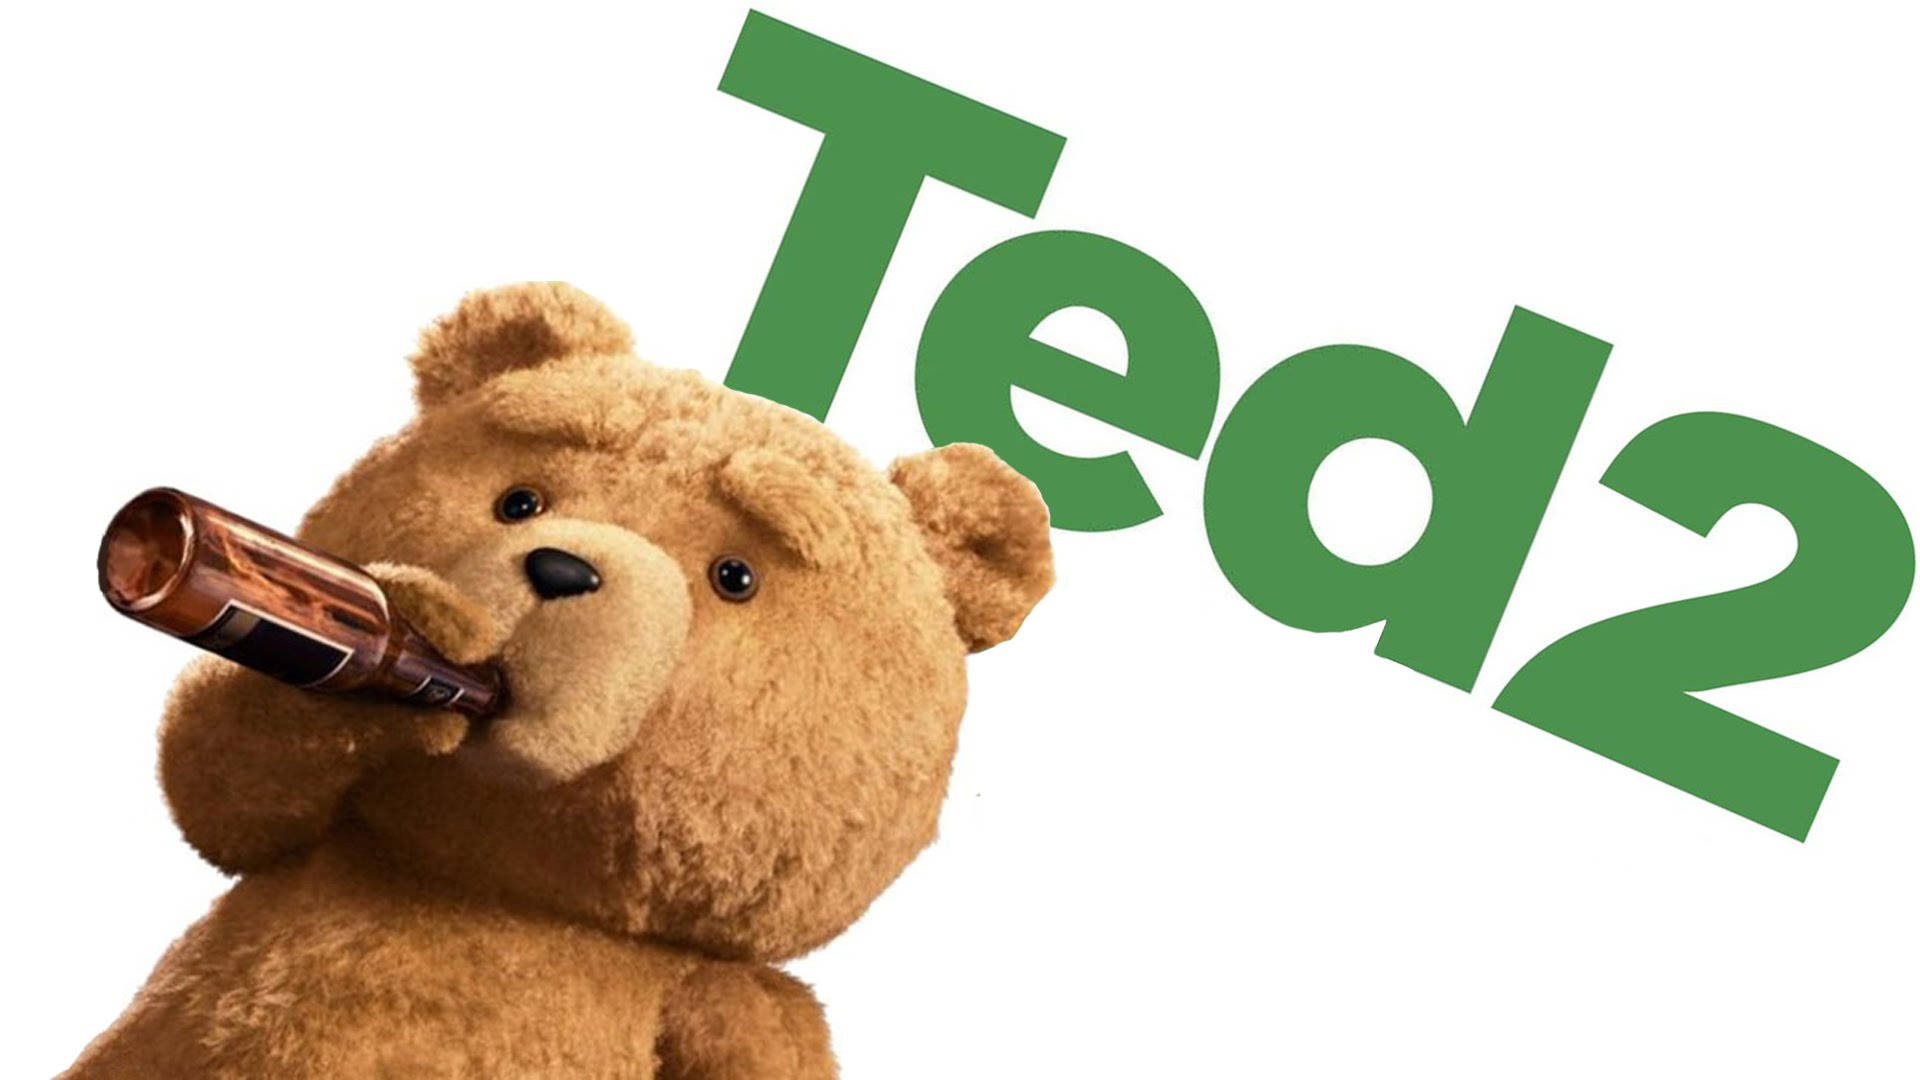 Ted Teaser Drinking Beer